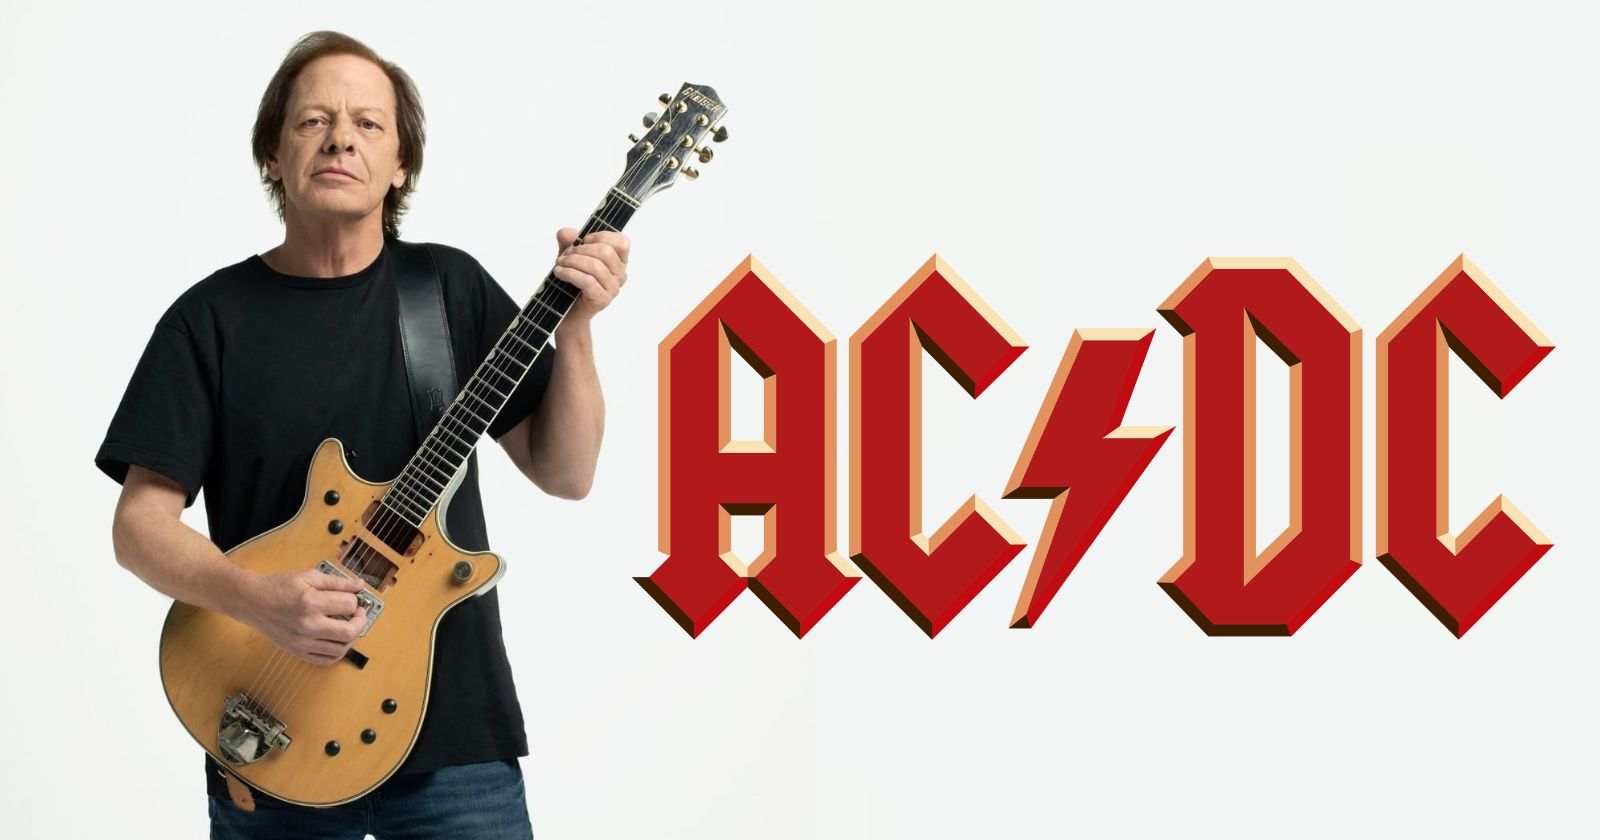 Stevie Young, guitarist of AC/DC